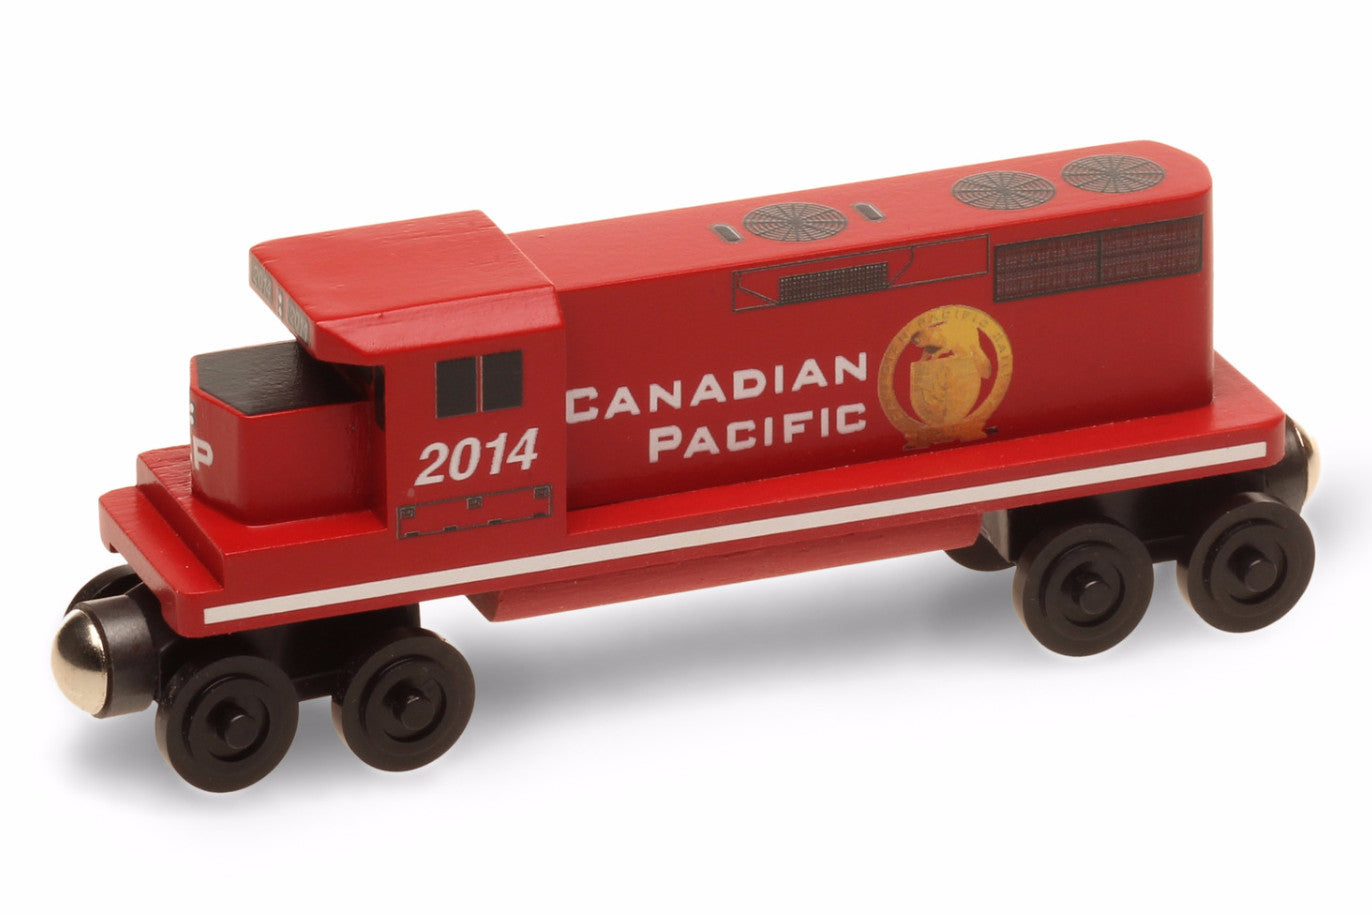 Whittle Shortline Railroad Canadian Pacific GP-38 Diesel Engine Wooden Toy Train